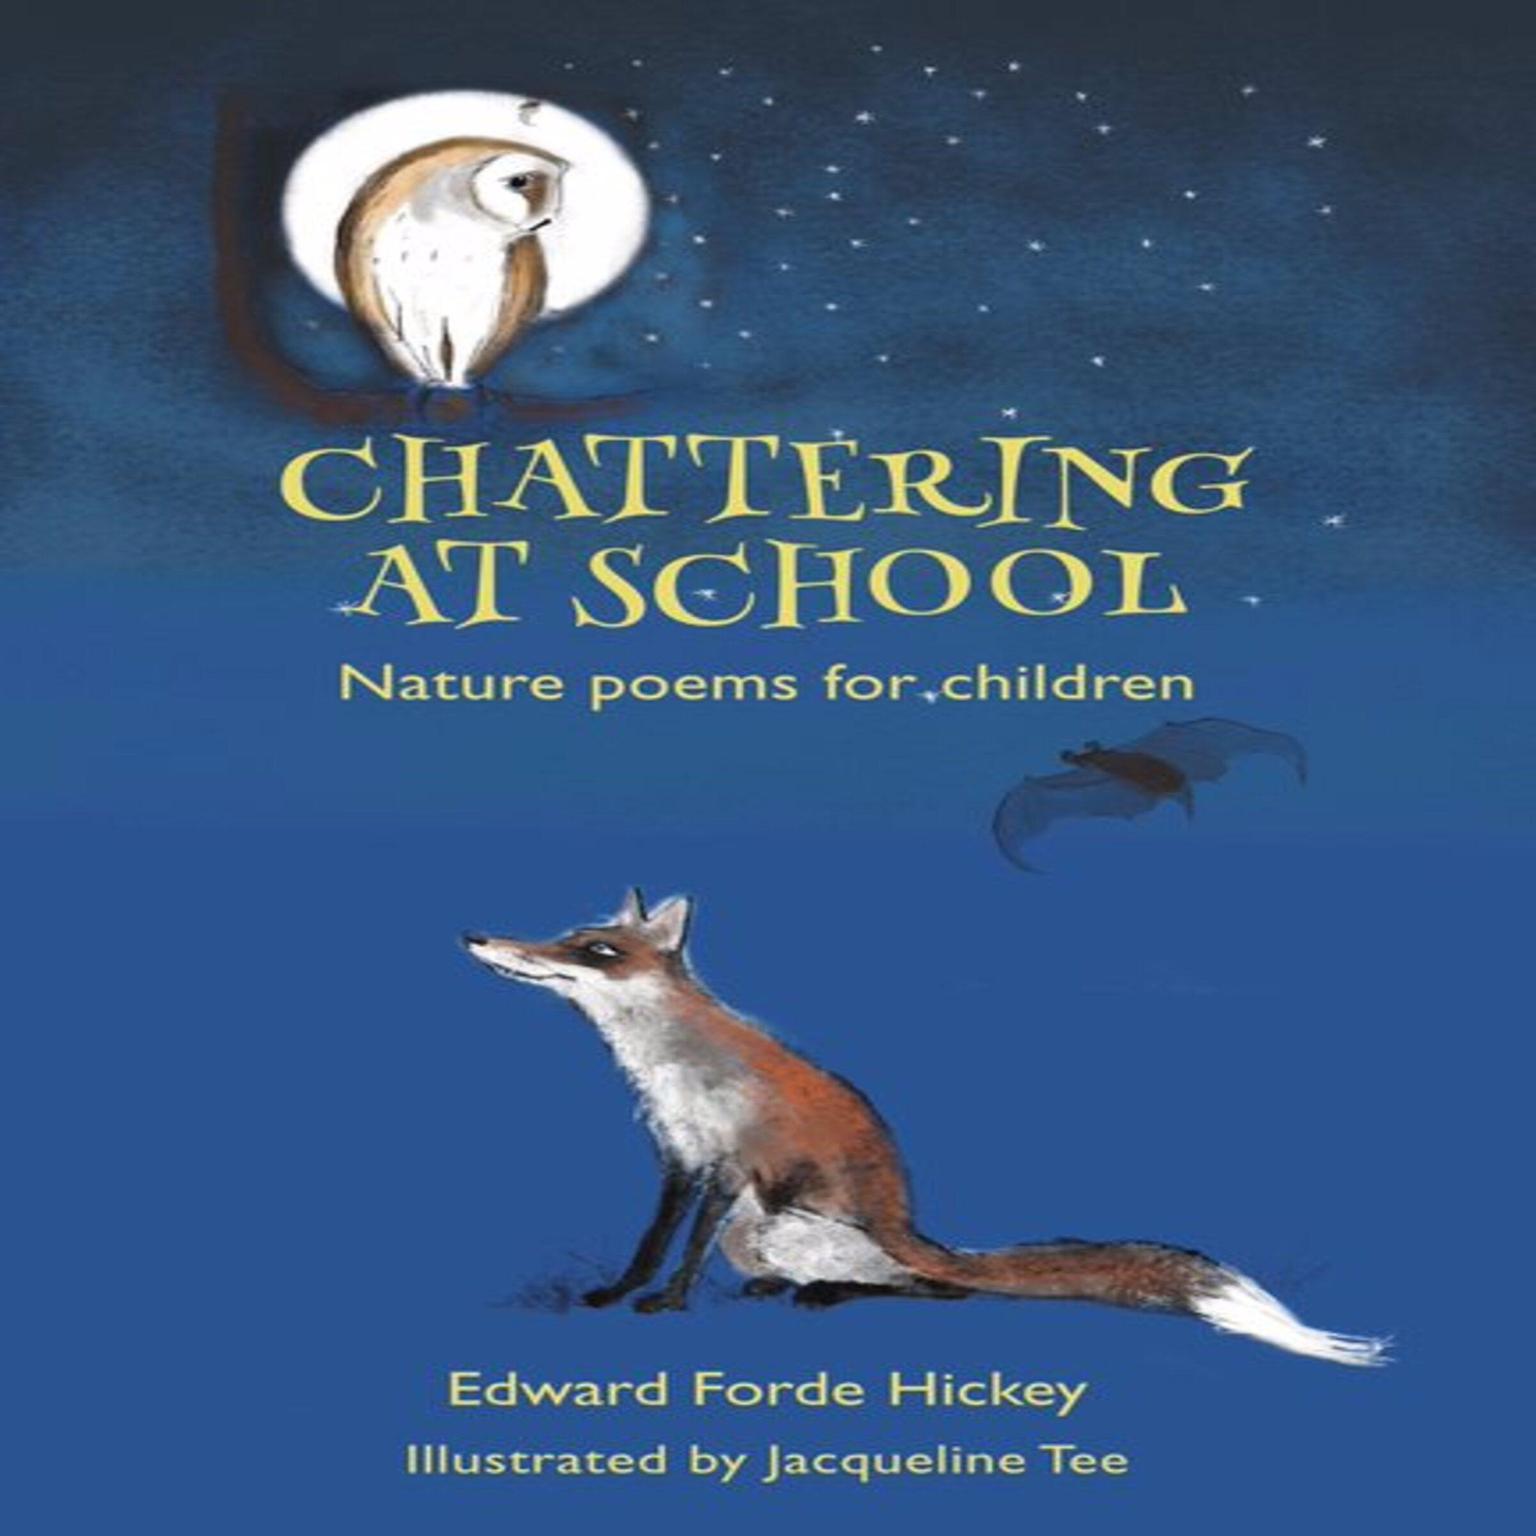 Chattering at School: Nature poems for children Audiobook, by Edward Forde Hickey